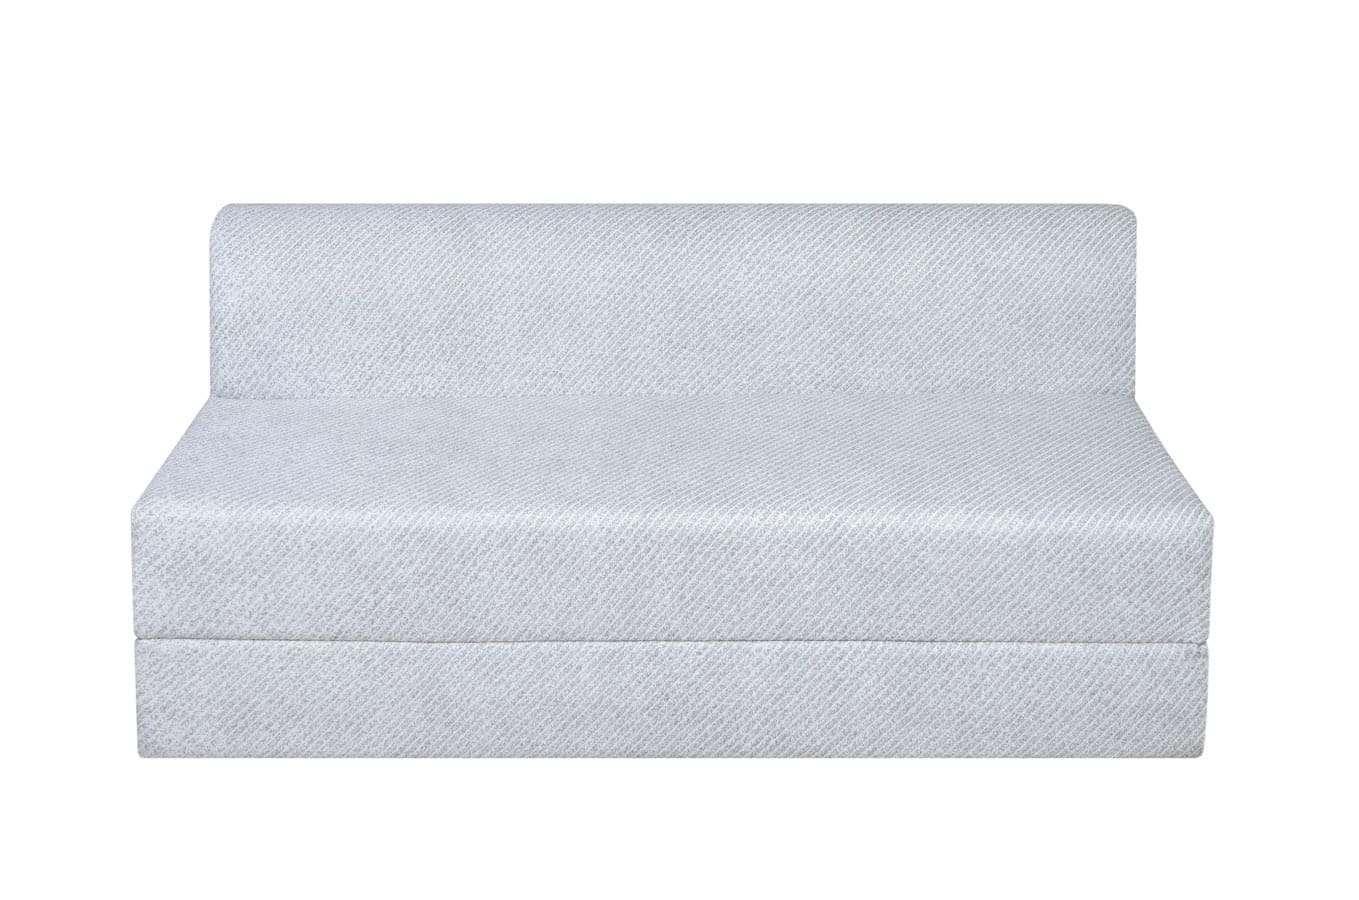 Bindal Sofa Cum Bed Double Size 4X6.5 Feet 48X78 Thickness 8 Inch